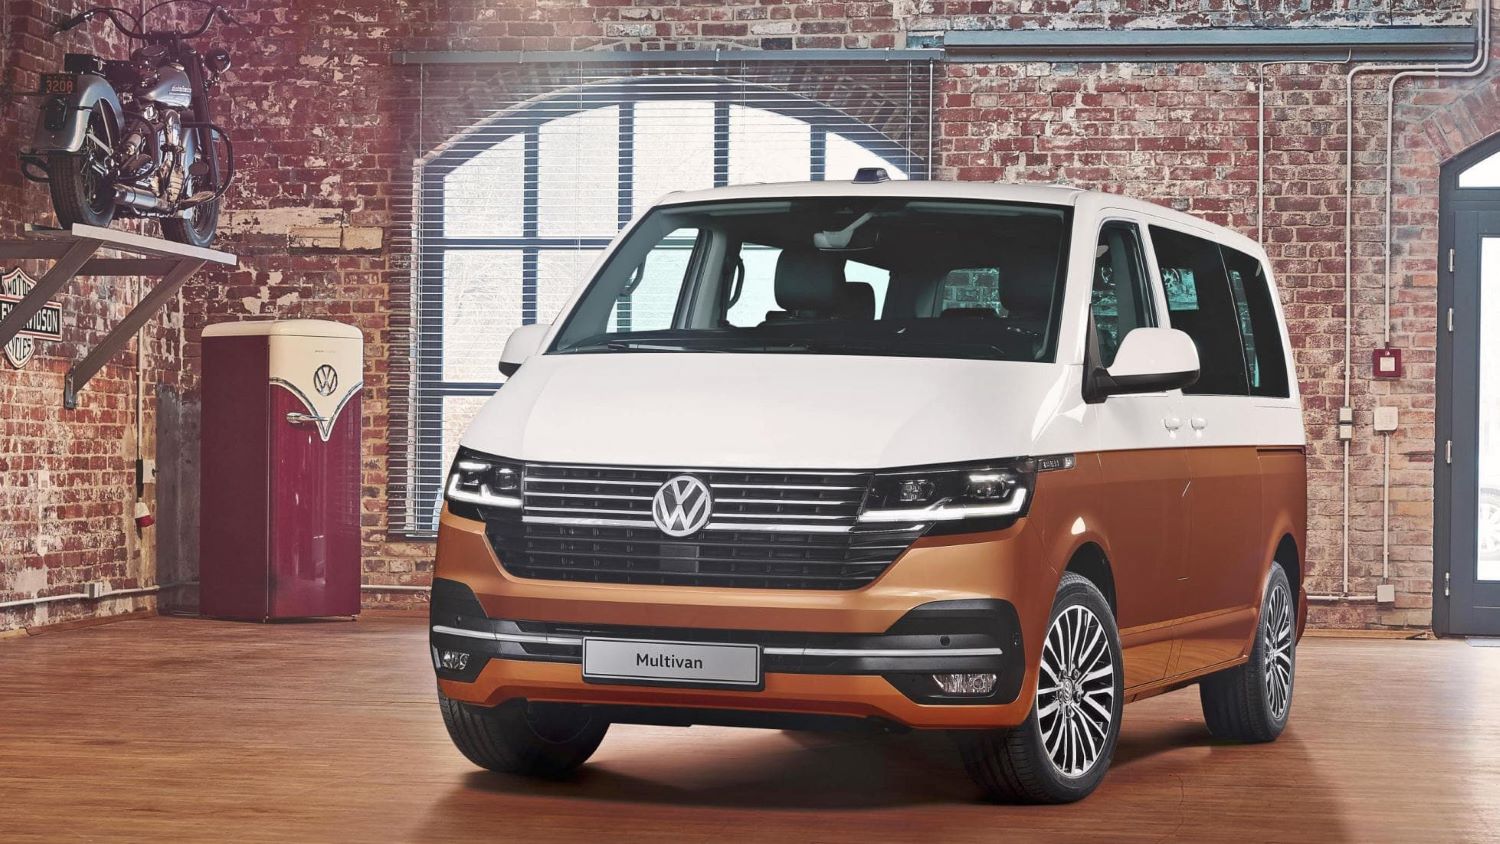 The Next-Gen VW Transporter Looks Very Ford-Like